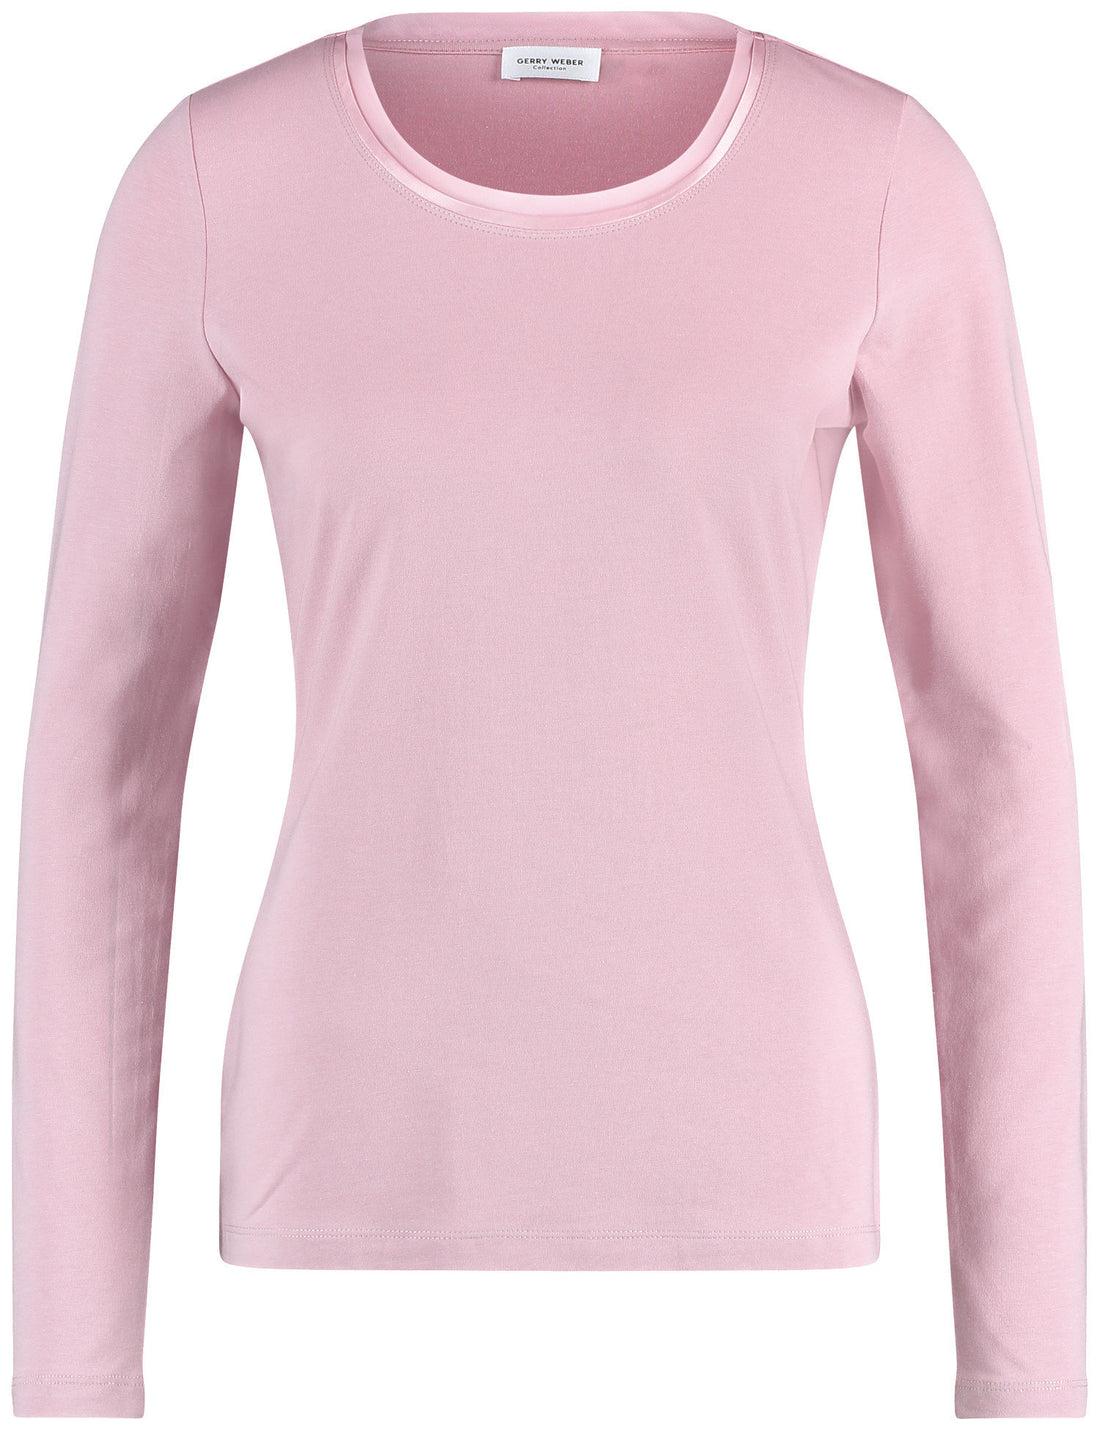 Long Sleeve Top With A Sheer Neckline Trim_370294-35060_30916_02